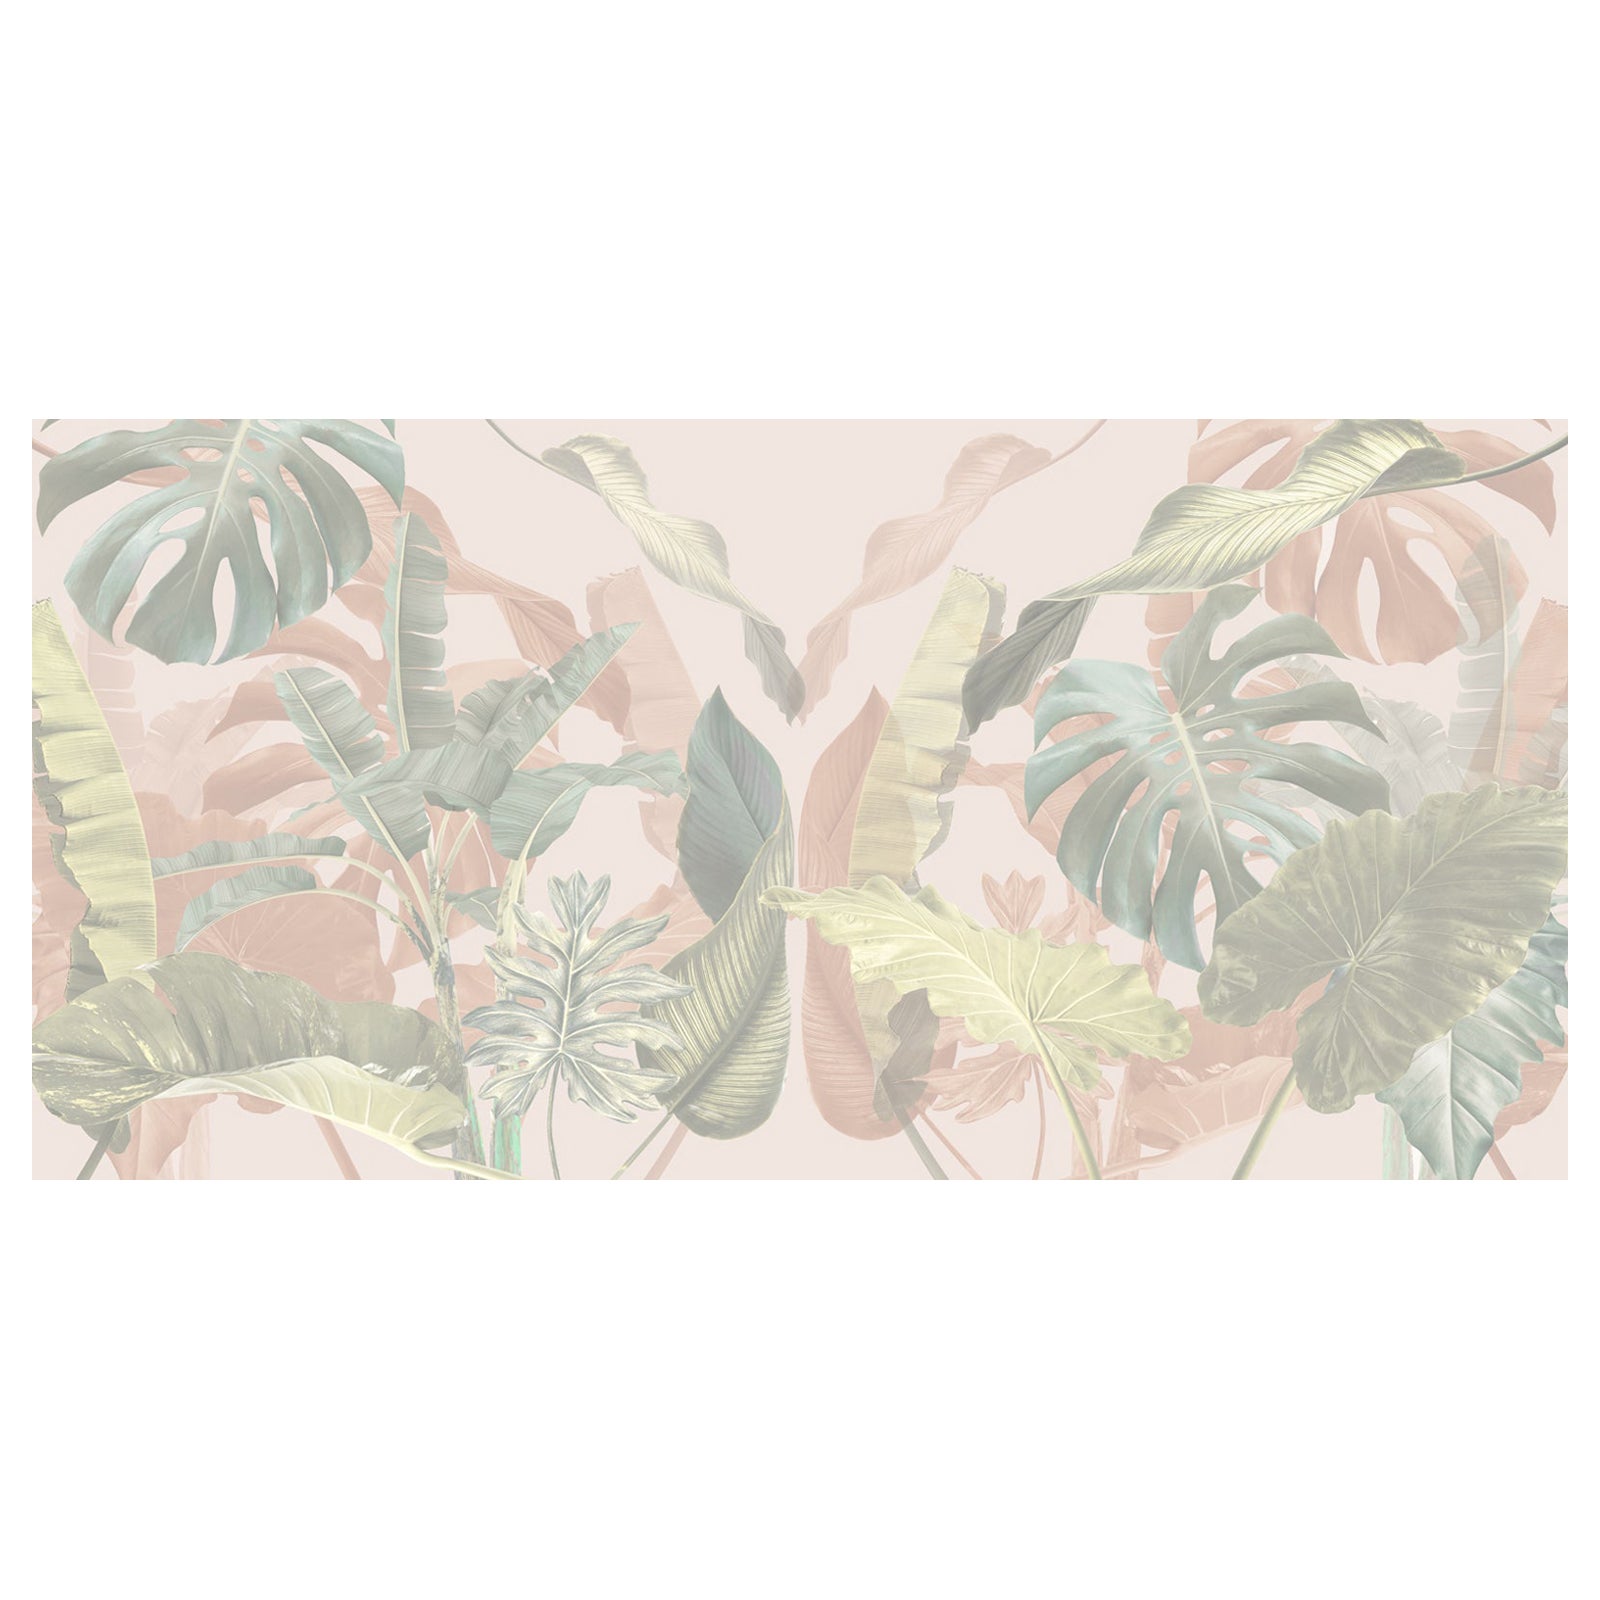 EDGE Collections JungleScape Daybreak; a whimsical nod to endless Summers For Sale